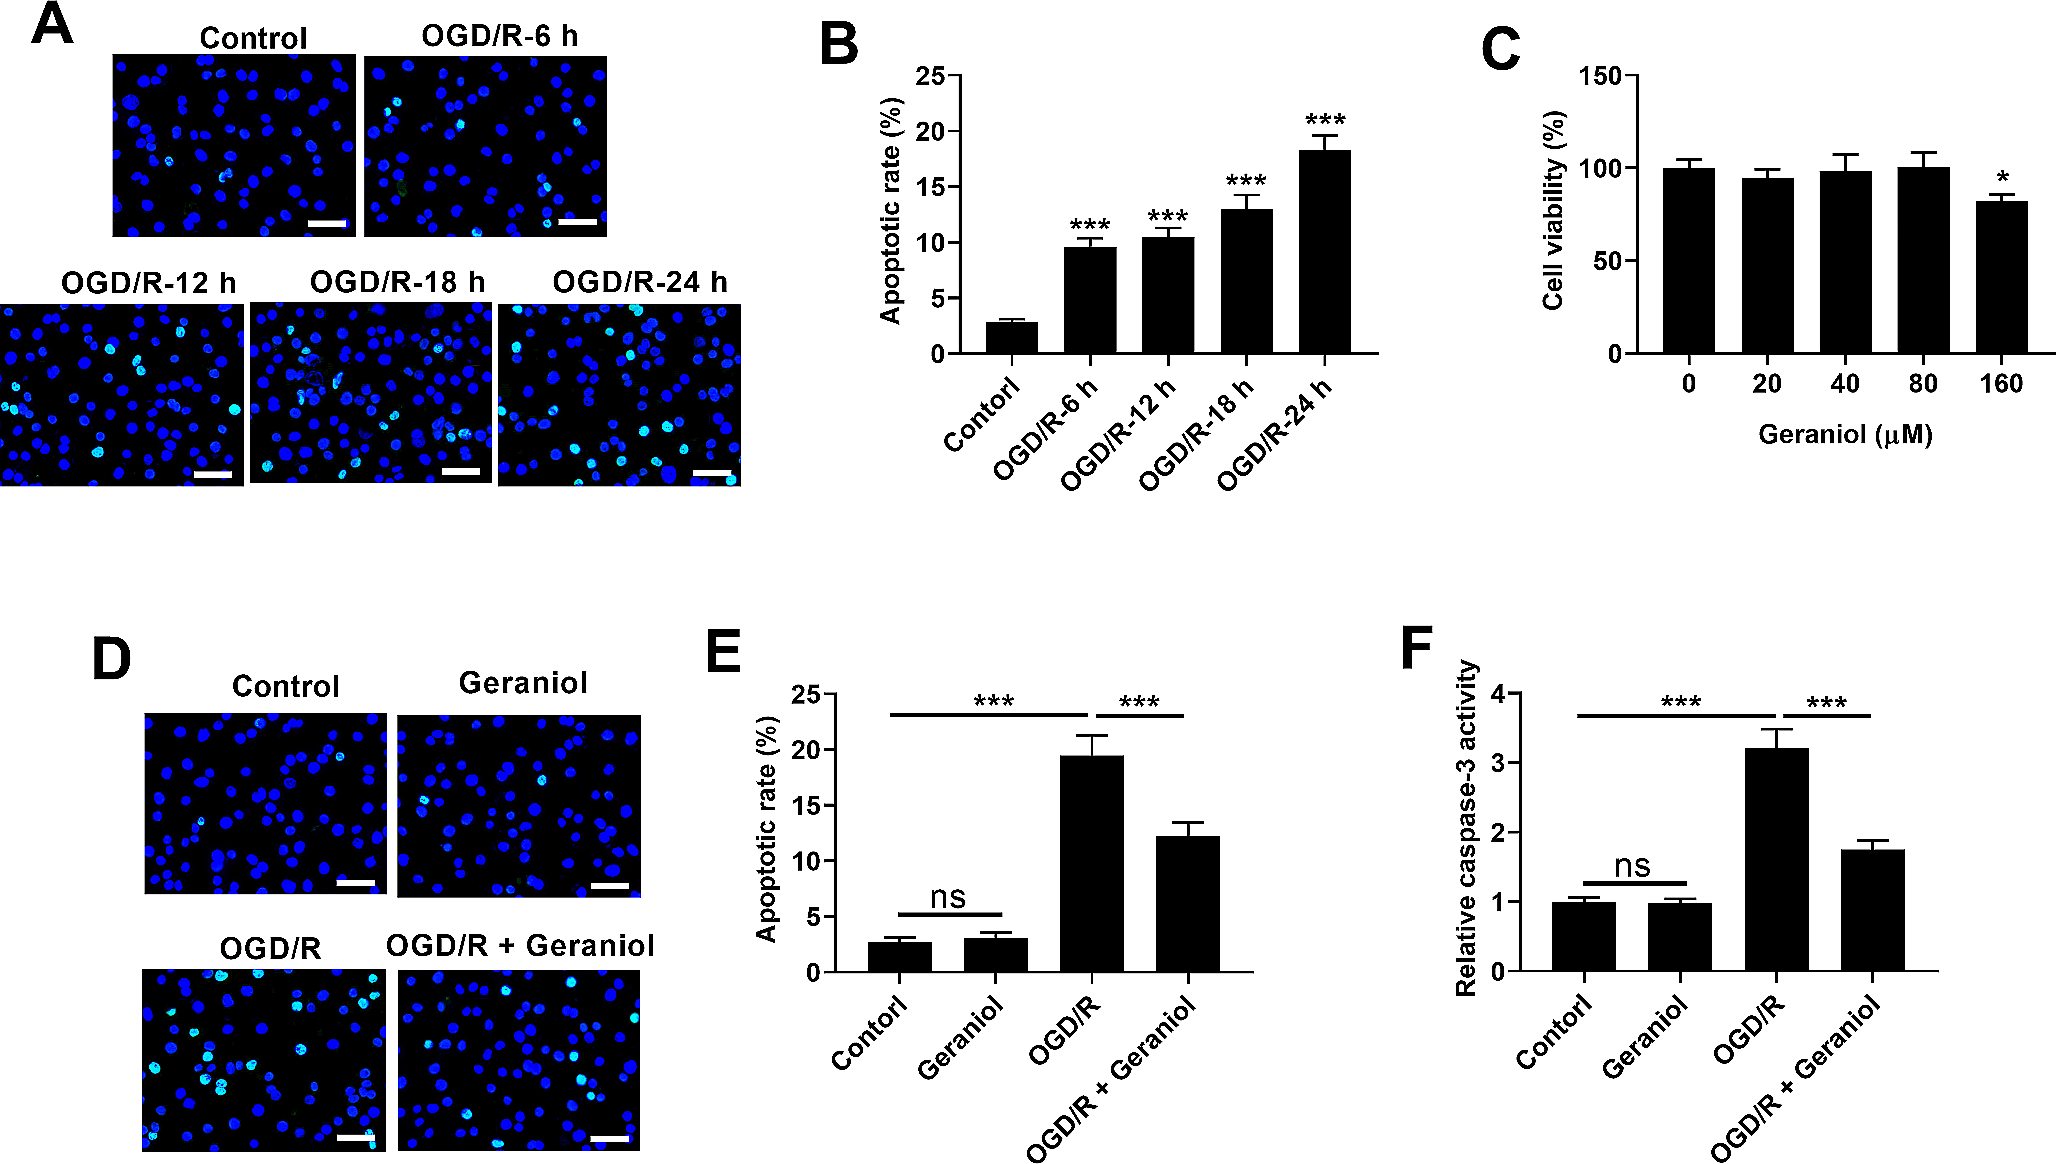 Geraniol attenuates oxygen-glucose deprivation/reoxygenation-induced ROS-dependent apoptosis and permeability of human brain microvascular endothelial cells by activating the Nrf-2/HO-1 pathway